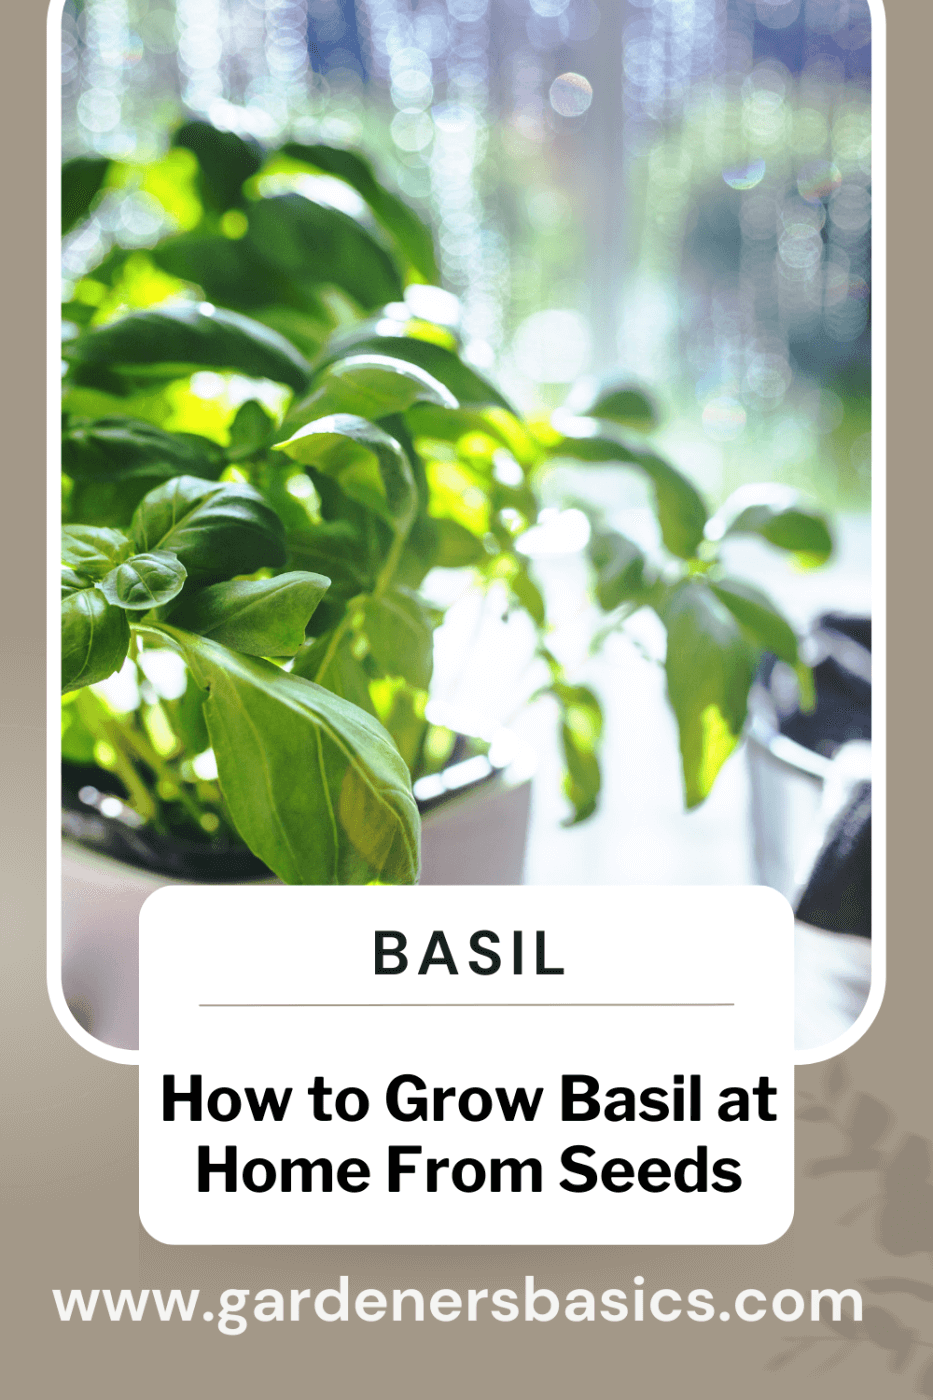 How to grow basil from seeds